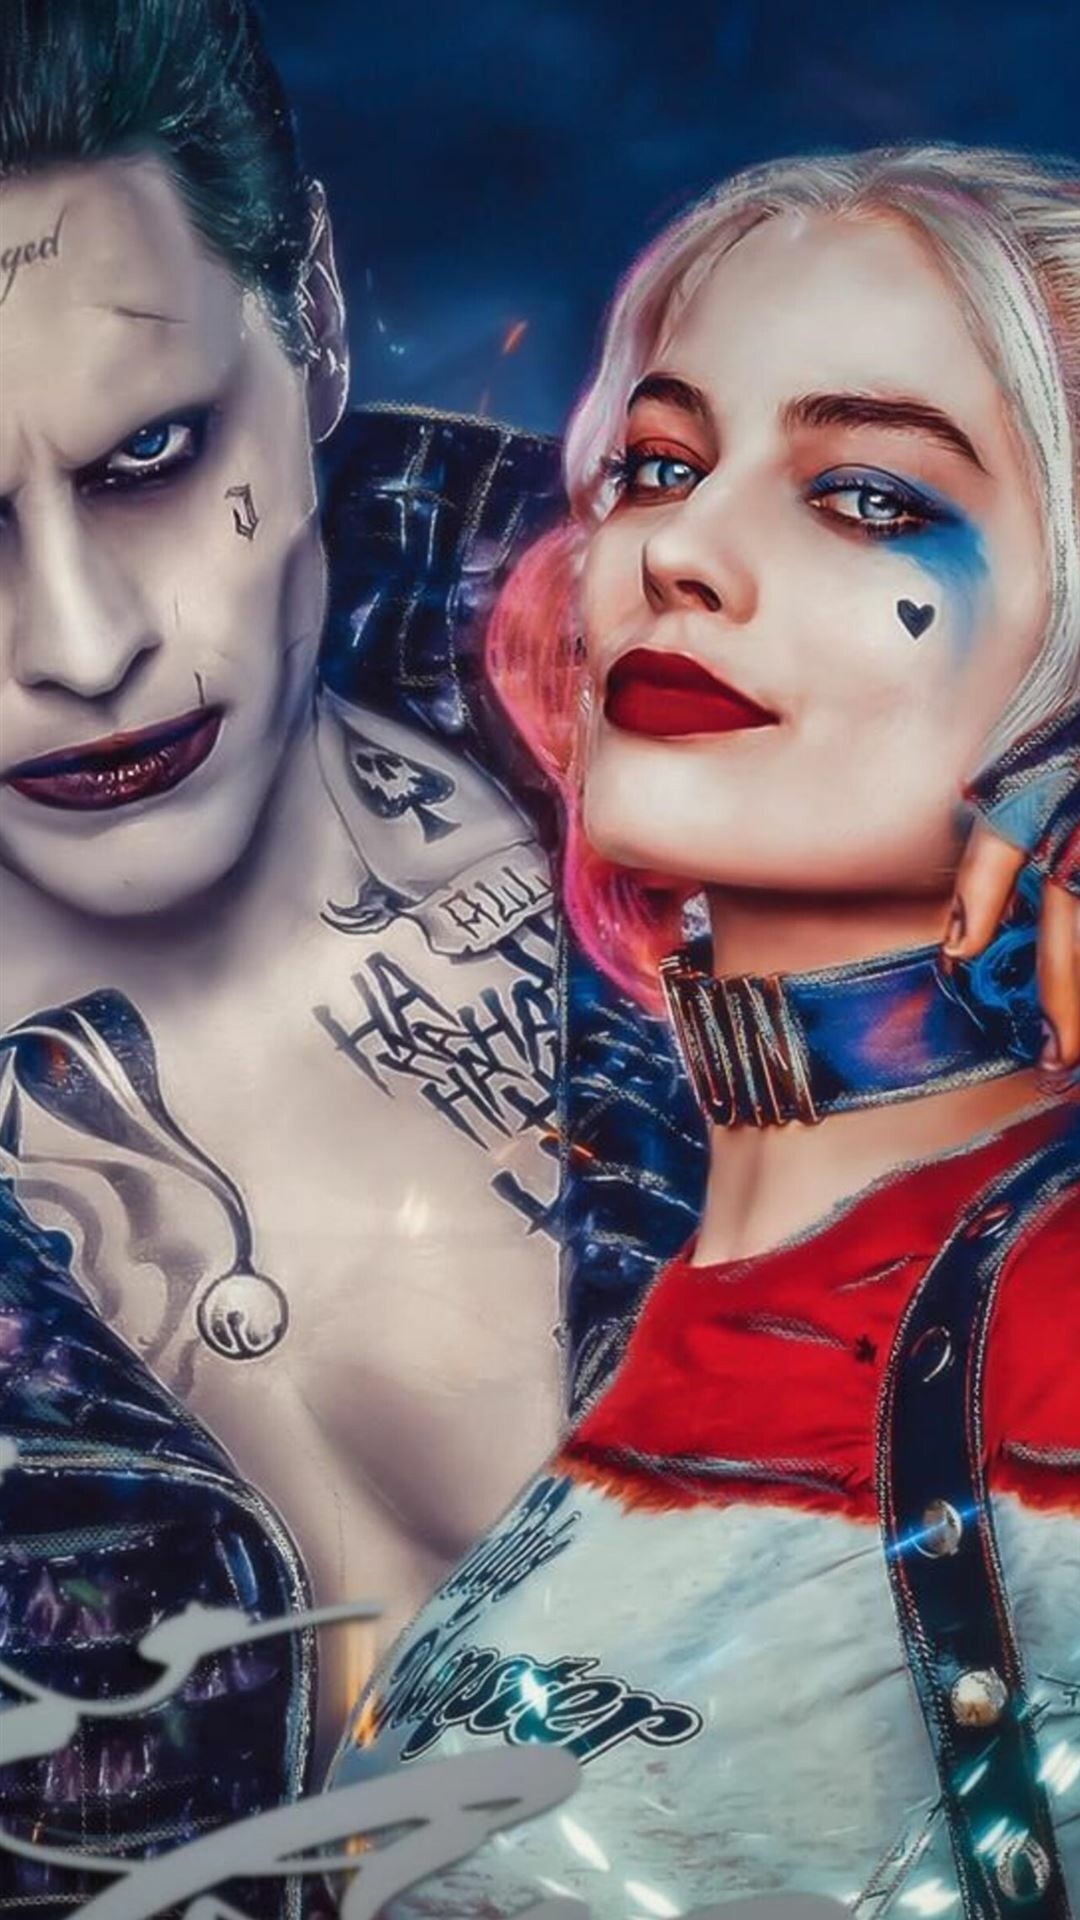 Suicide Squad: Joker manipulates psychiatrist Harleen Quinzel into falling in love with him during his time as a patient in Arkham Asylum. 1080x1920 Full HD Wallpaper.